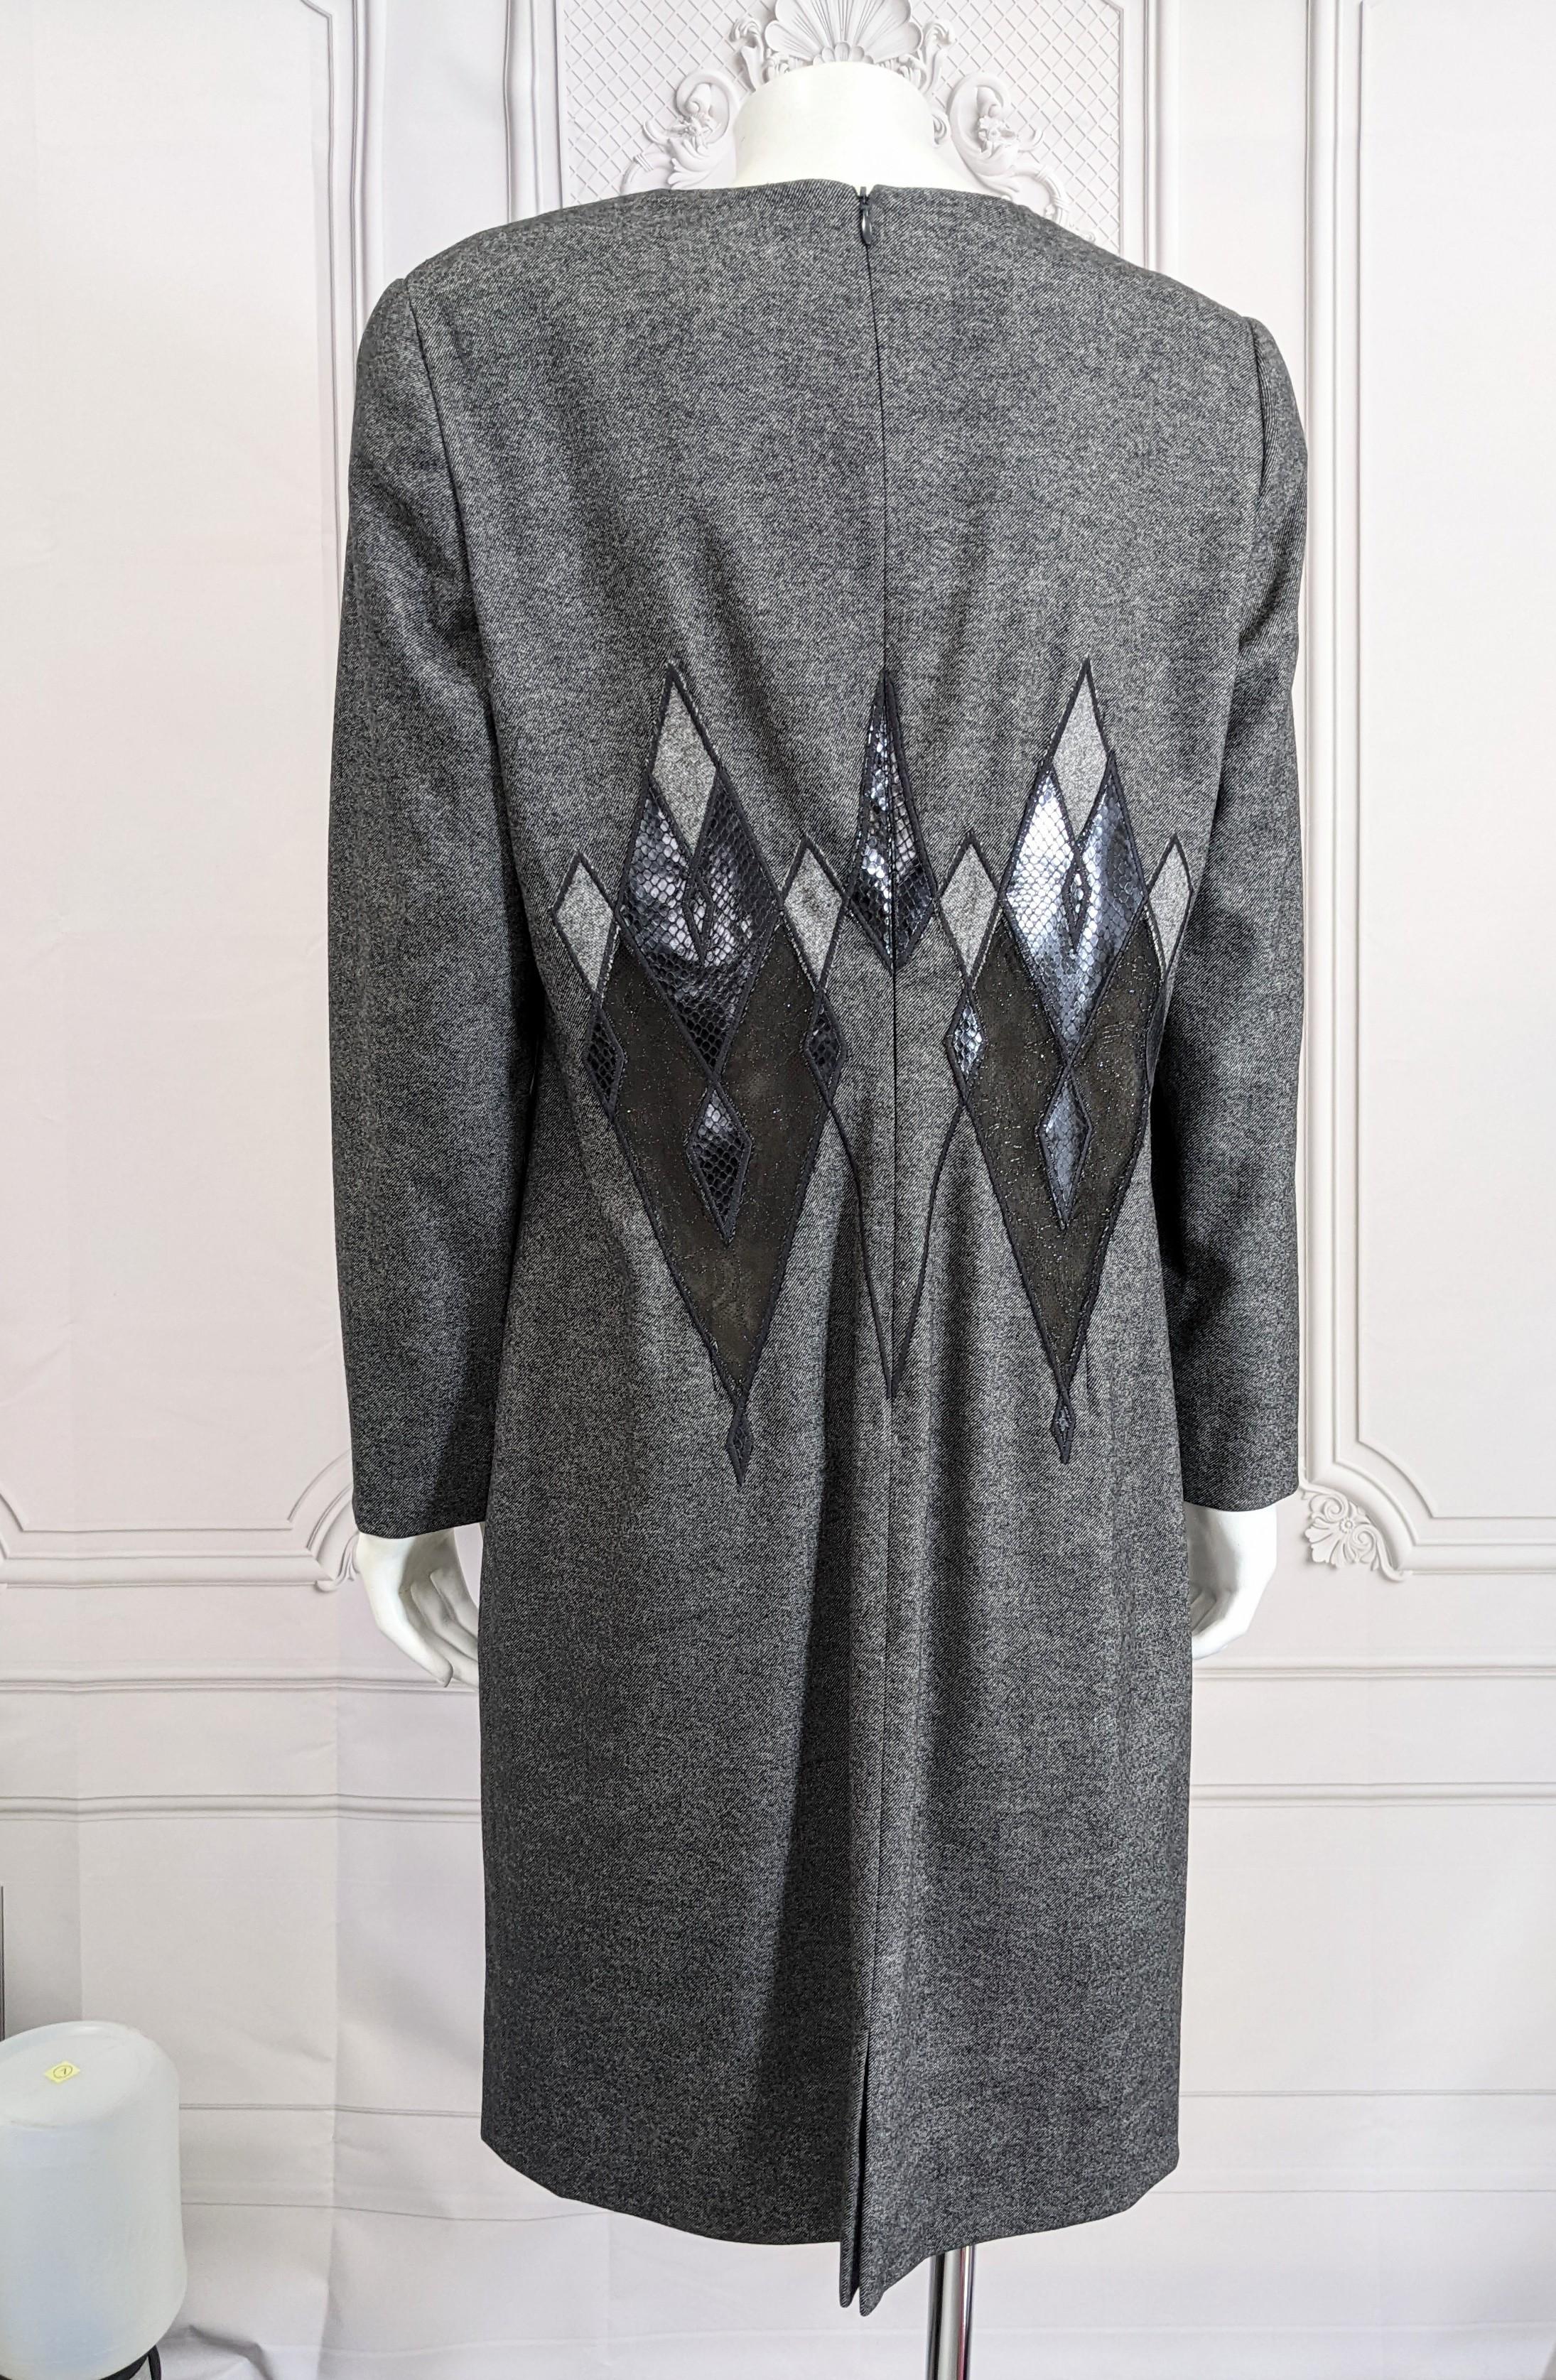 Givenchy By Alexander McQueen Flannel, Metallic Lace and Snakeskin Dress For Sale 1